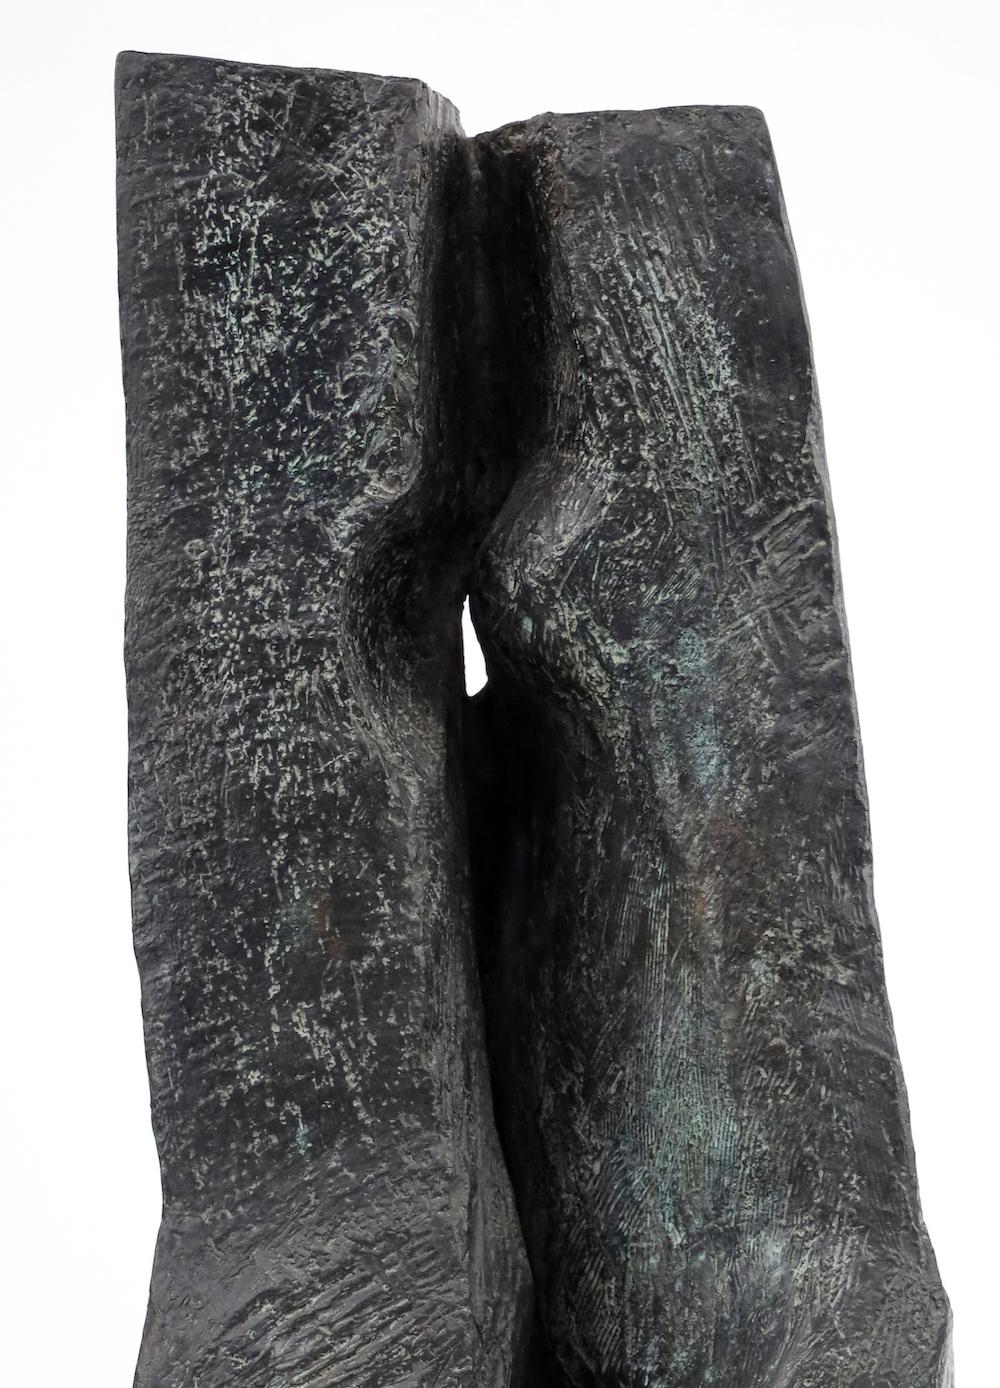 Duo by Martine Demal - Contemporary bronze sculpture, semi abstract 4